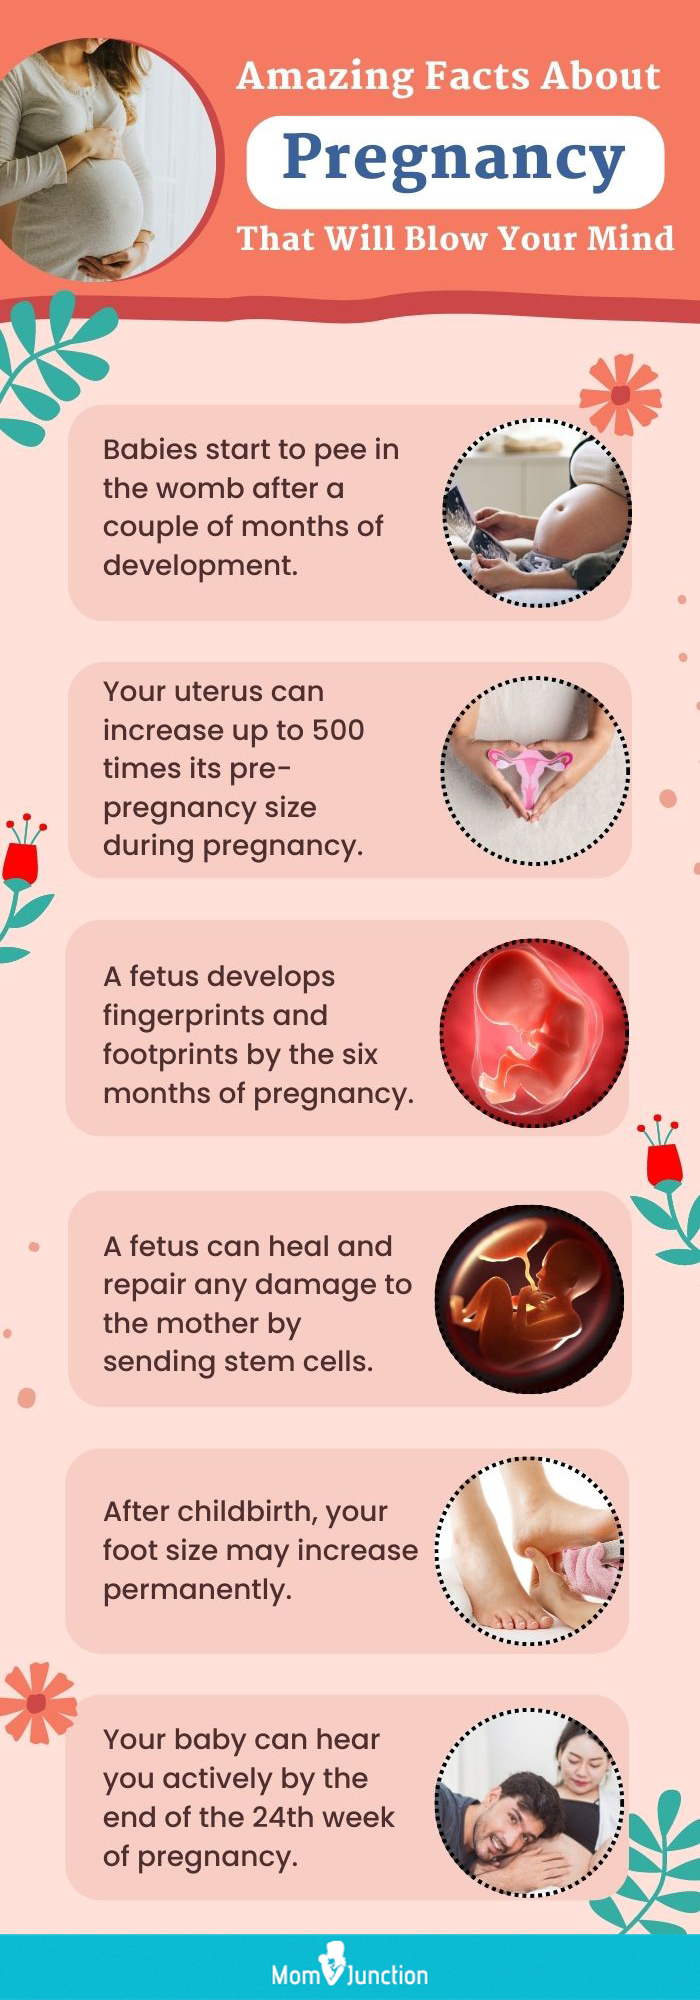 amazing facts about pregnancy that will blow your mind (infographic)